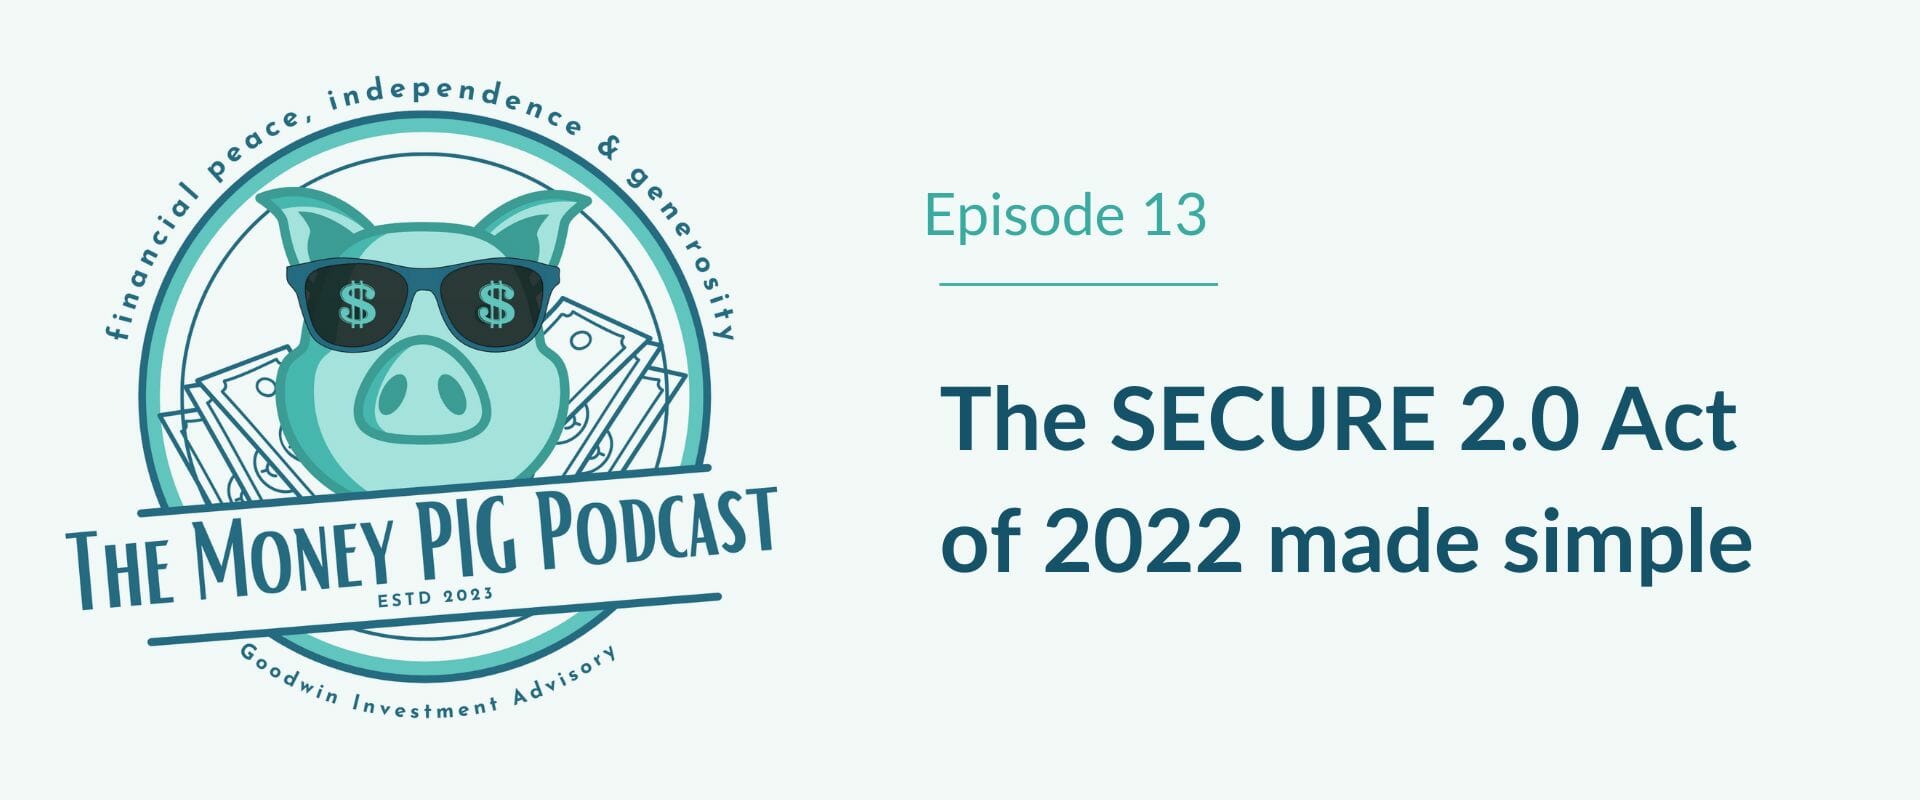 The SECURE 2.0 Act of 2022 made simple